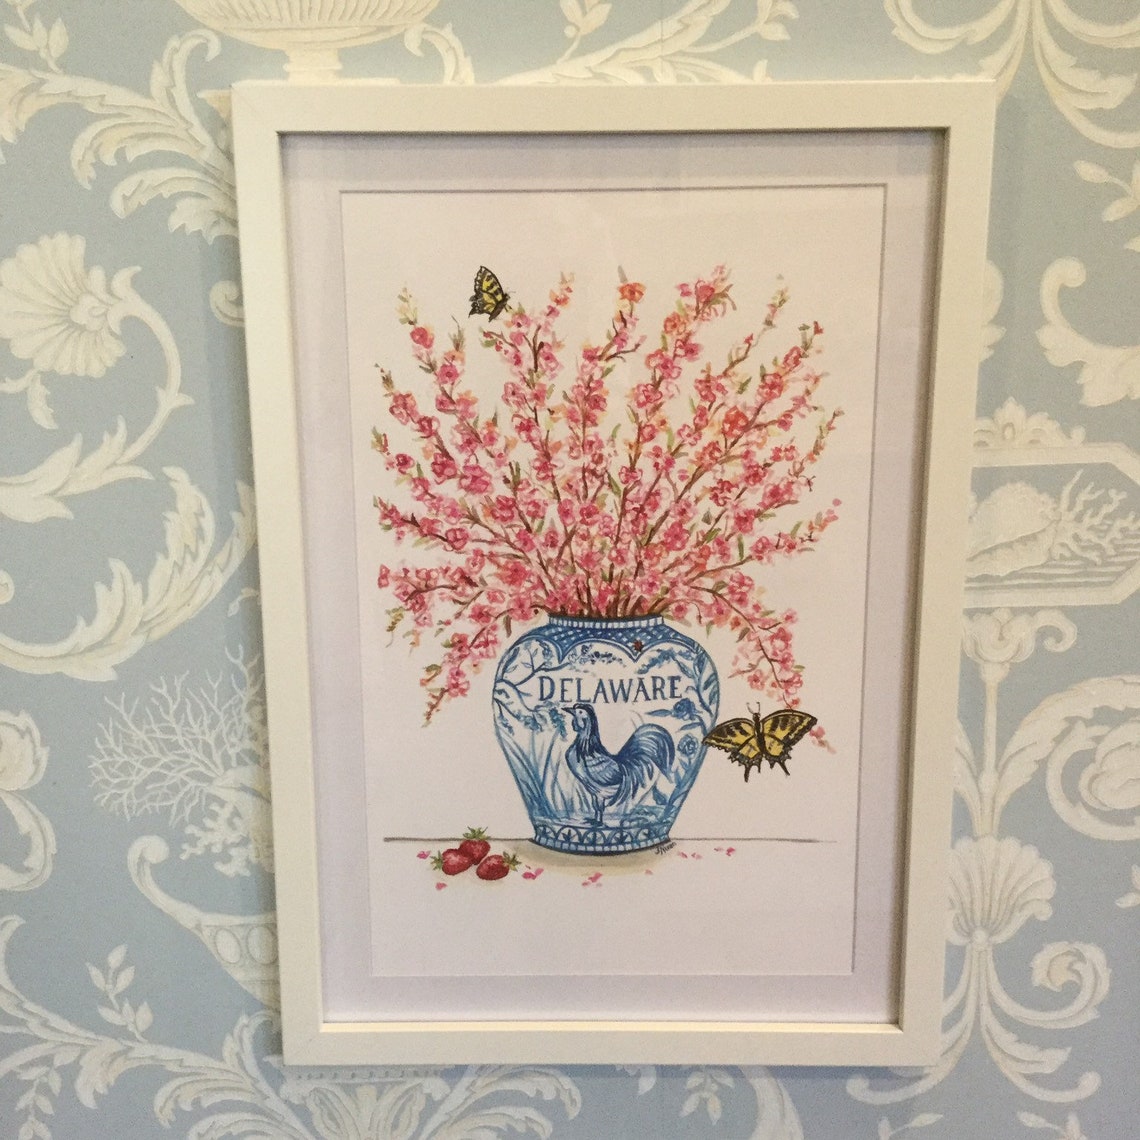 Delaware Peach Blossoms and Blue Hen Prints - Etsy